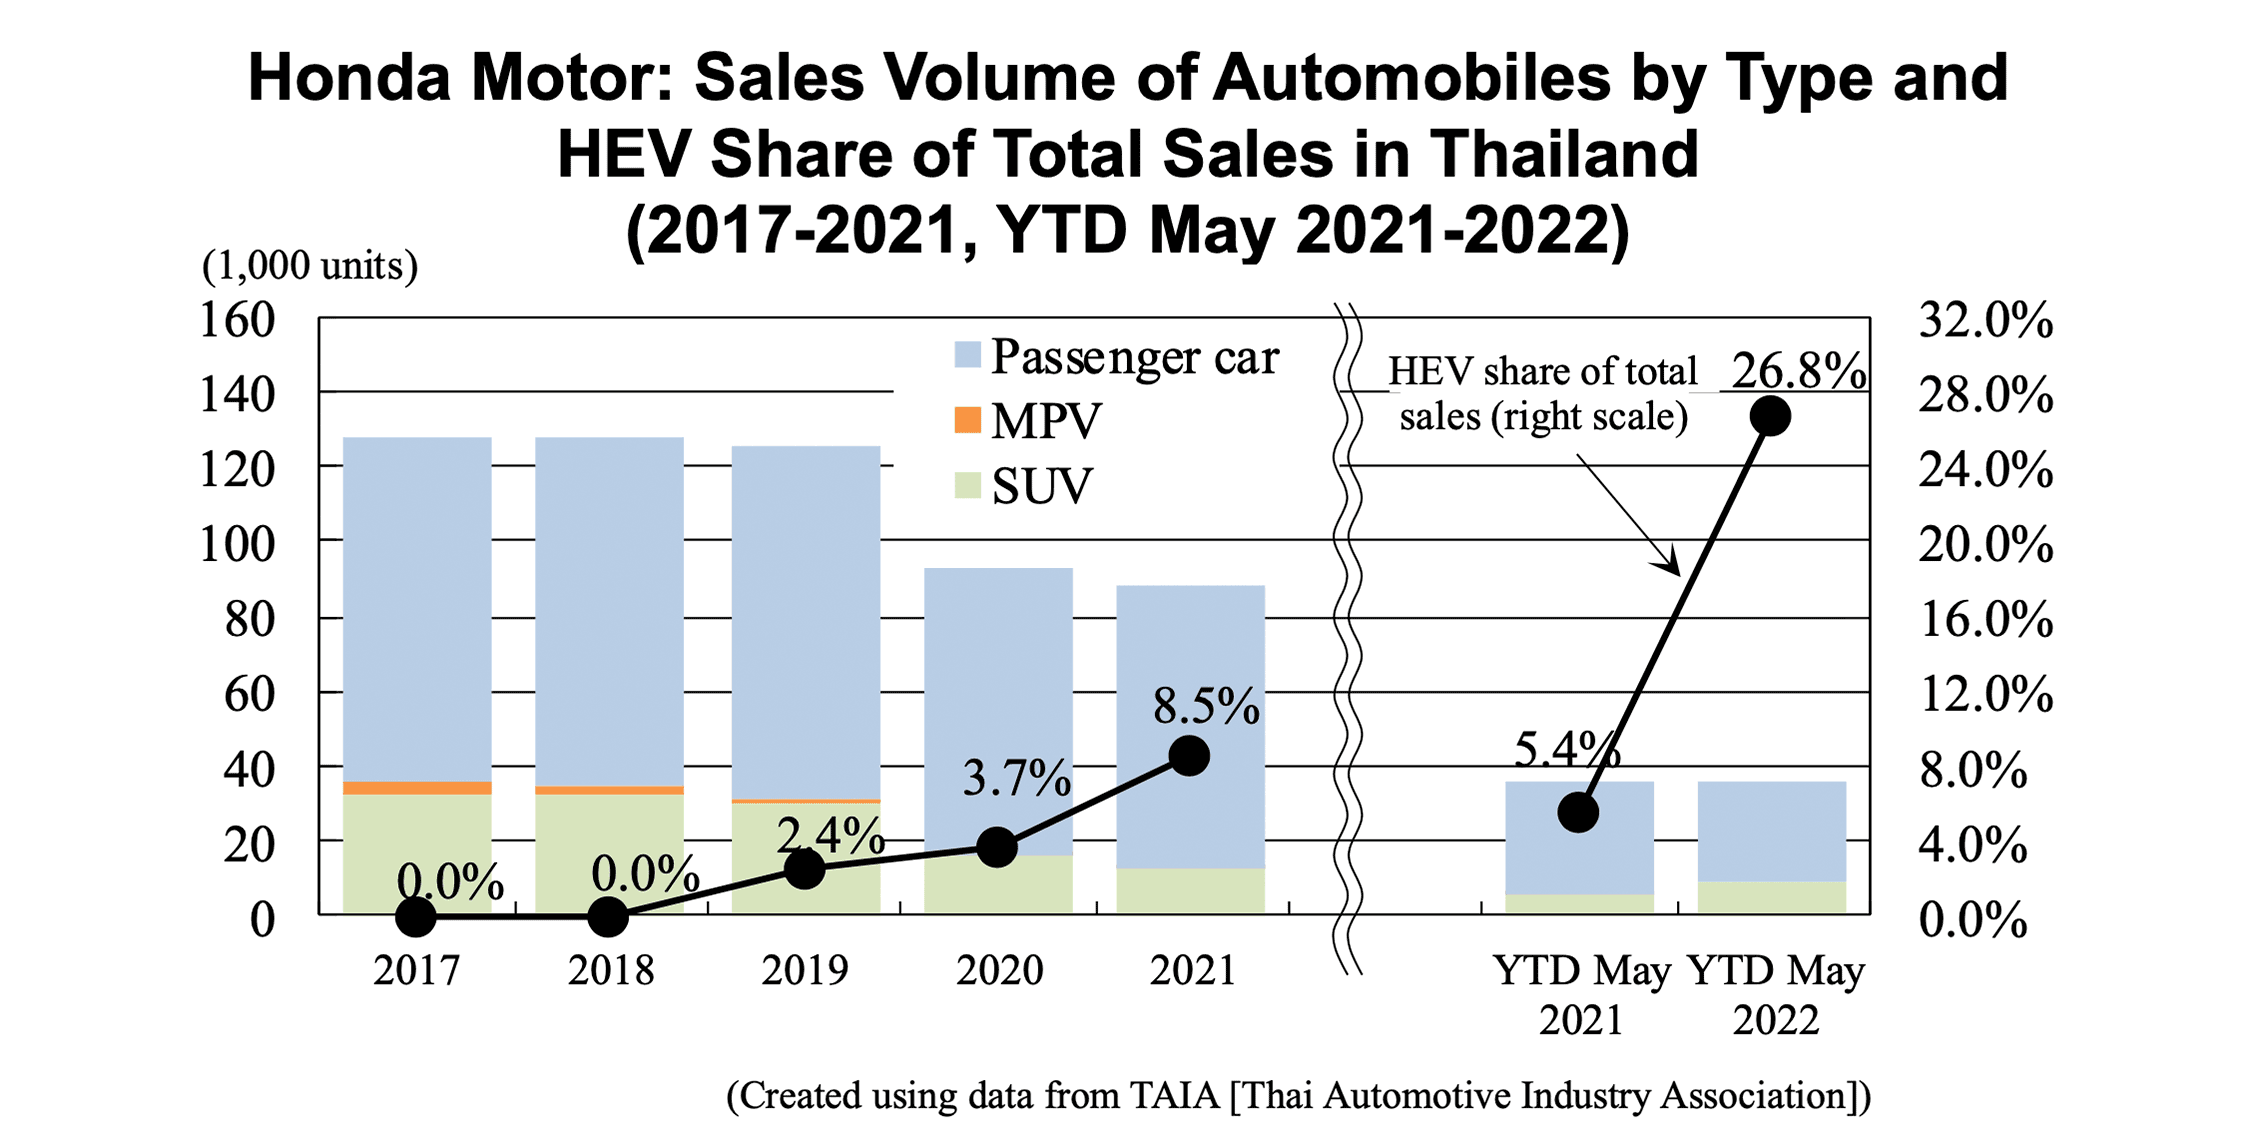 Bar graph: Honda Motor: Sales Volume of Automobiles by Type and HEV Share of Total Sales in Thailand (2017-2021, YTD May 2021-2022)